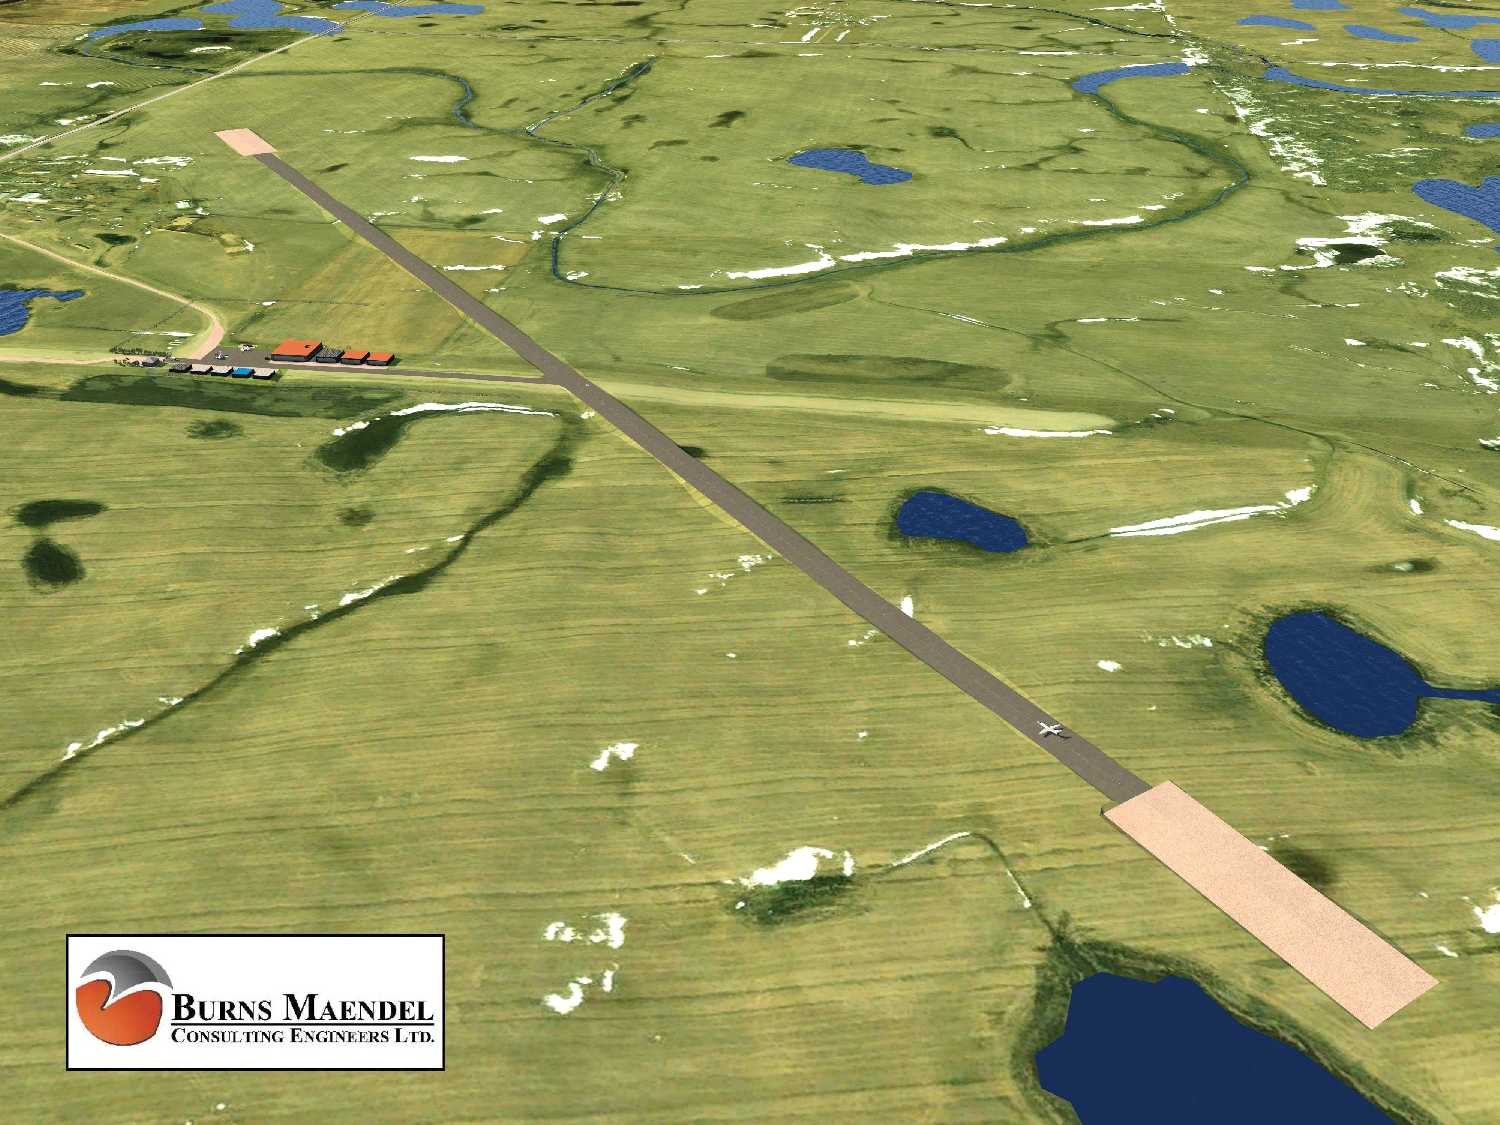 Airport expansion The engineer’s drawing of the expanded runway at Moosomin’s airport. The longer, paved runway would accommodate the Saskatchewan Air Ambulance.